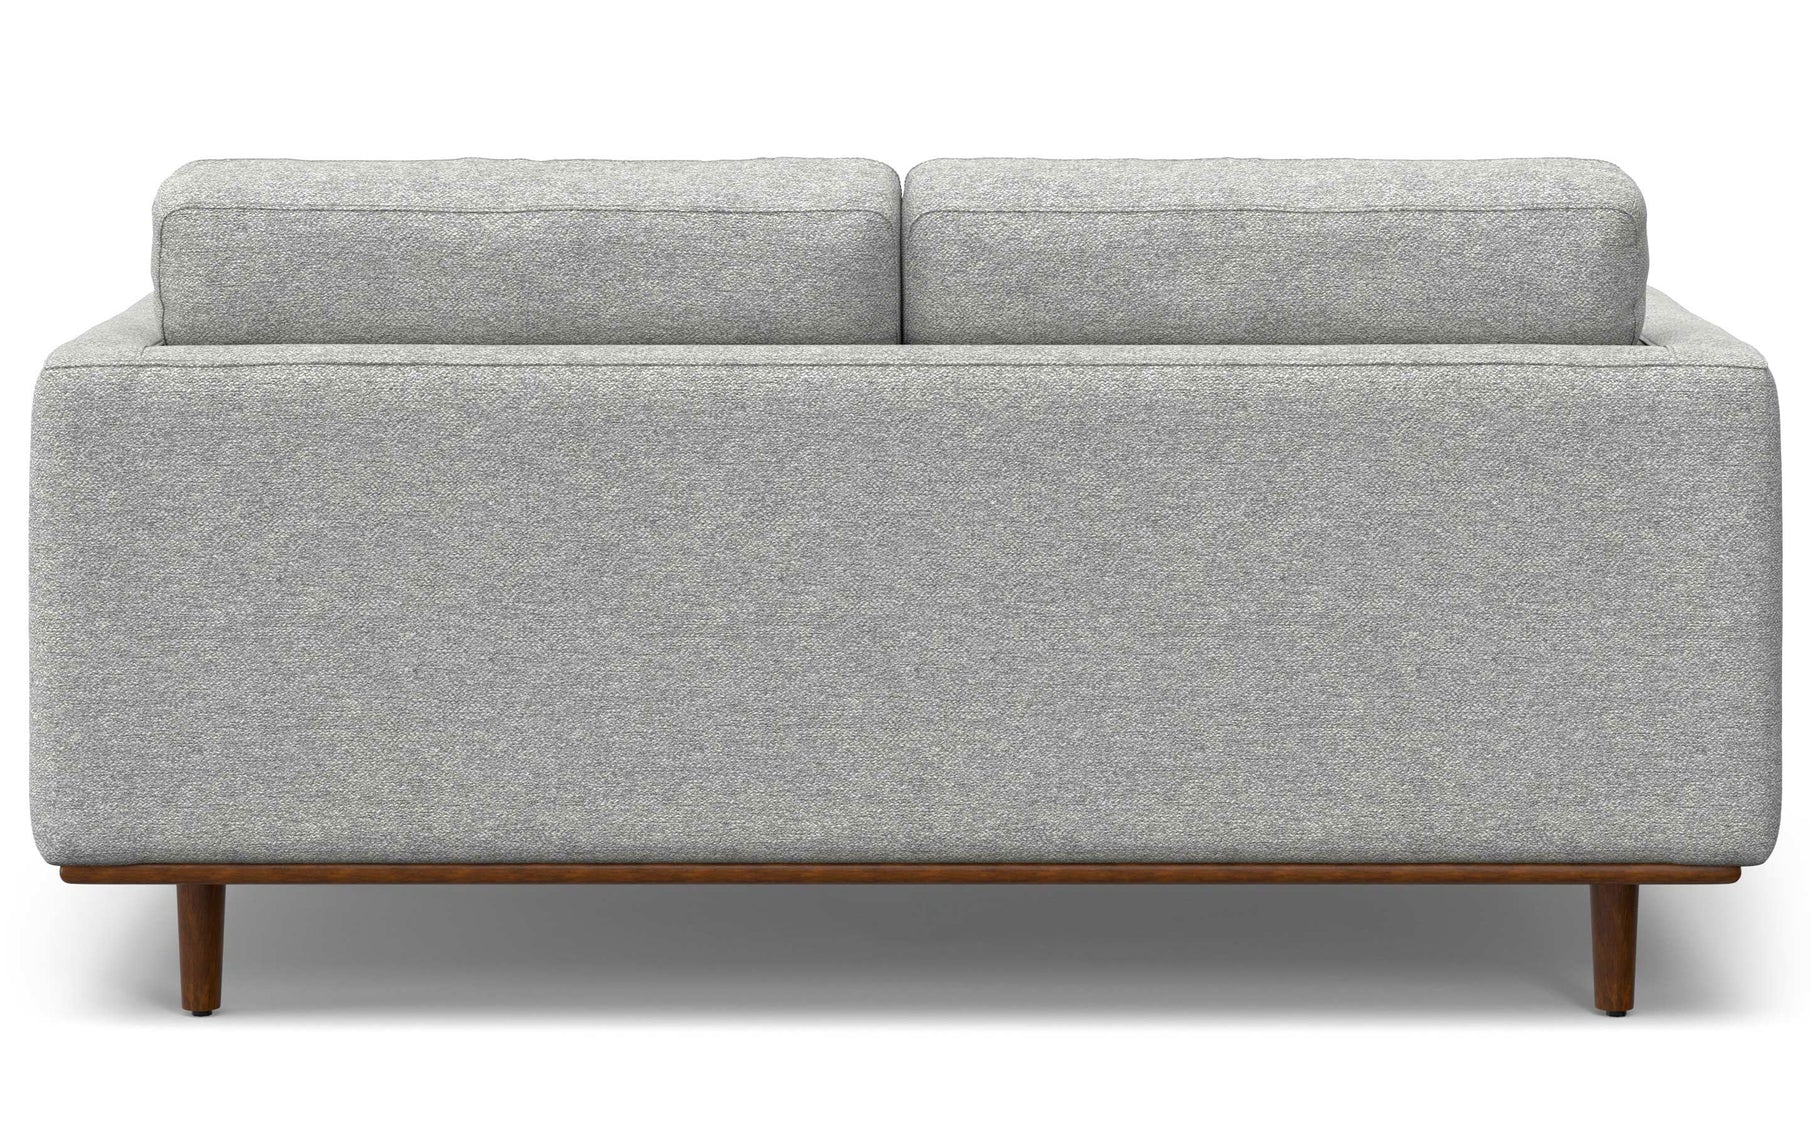 Mist Grey Woven Polyester Fabric | Morrison 72-inch Sofa and Ottoman Set in Woven-Blend Fabric